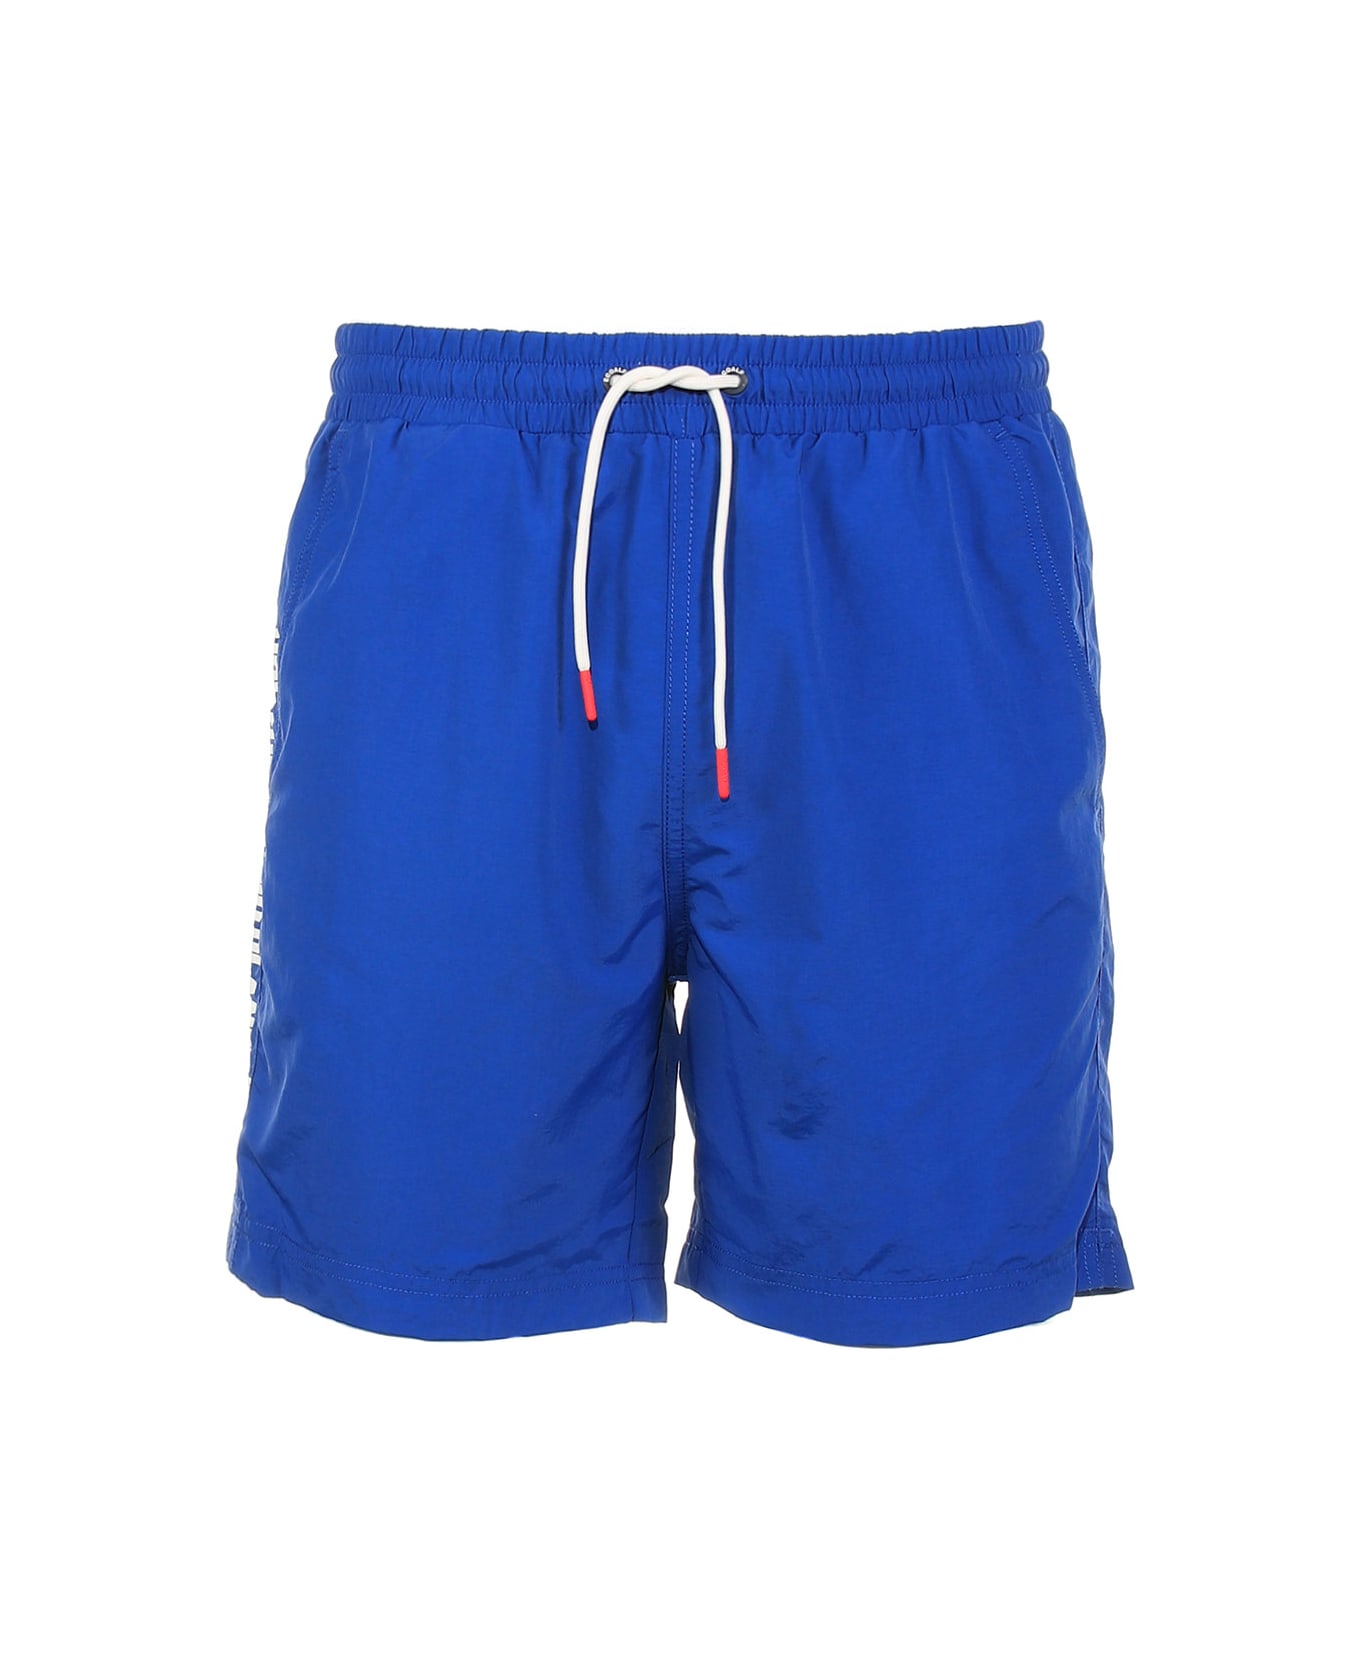 Ecoalf Swimsuit With Drawstring At The Waist - ROYAL BLUE 水着